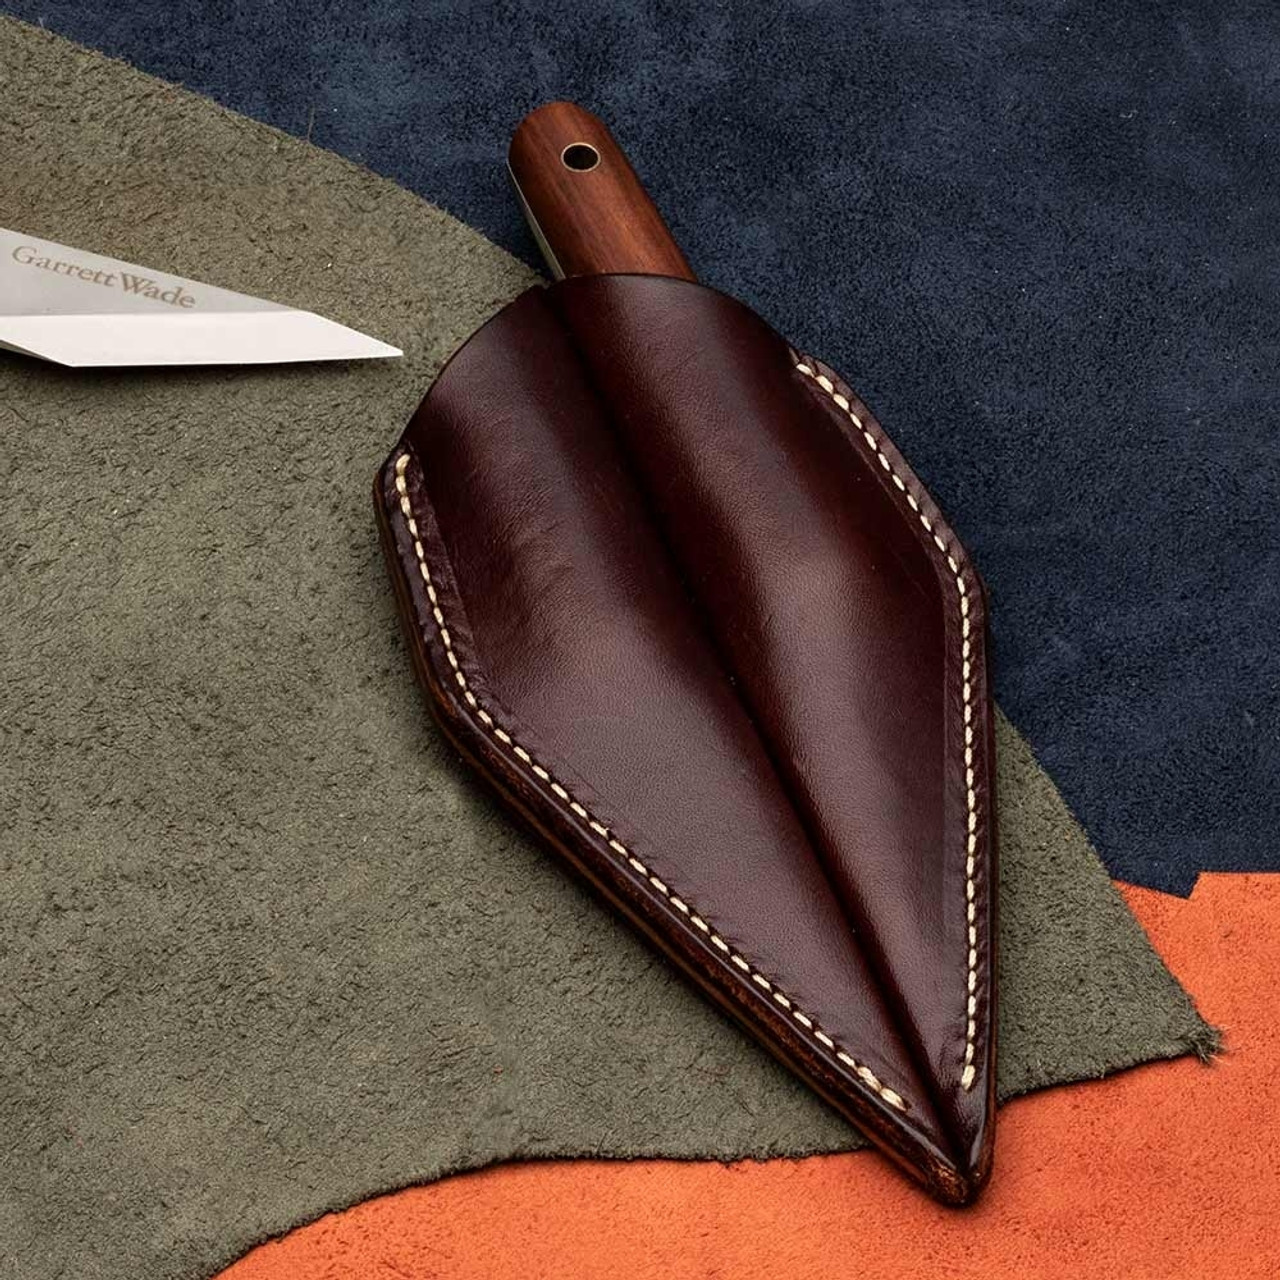 DIUDUS Leather Craft Knife Leather Cutting Knife Flat Blade Straight Angle Cutting Knife with Leather Knife Cover Comfortable Black Wooden Handle